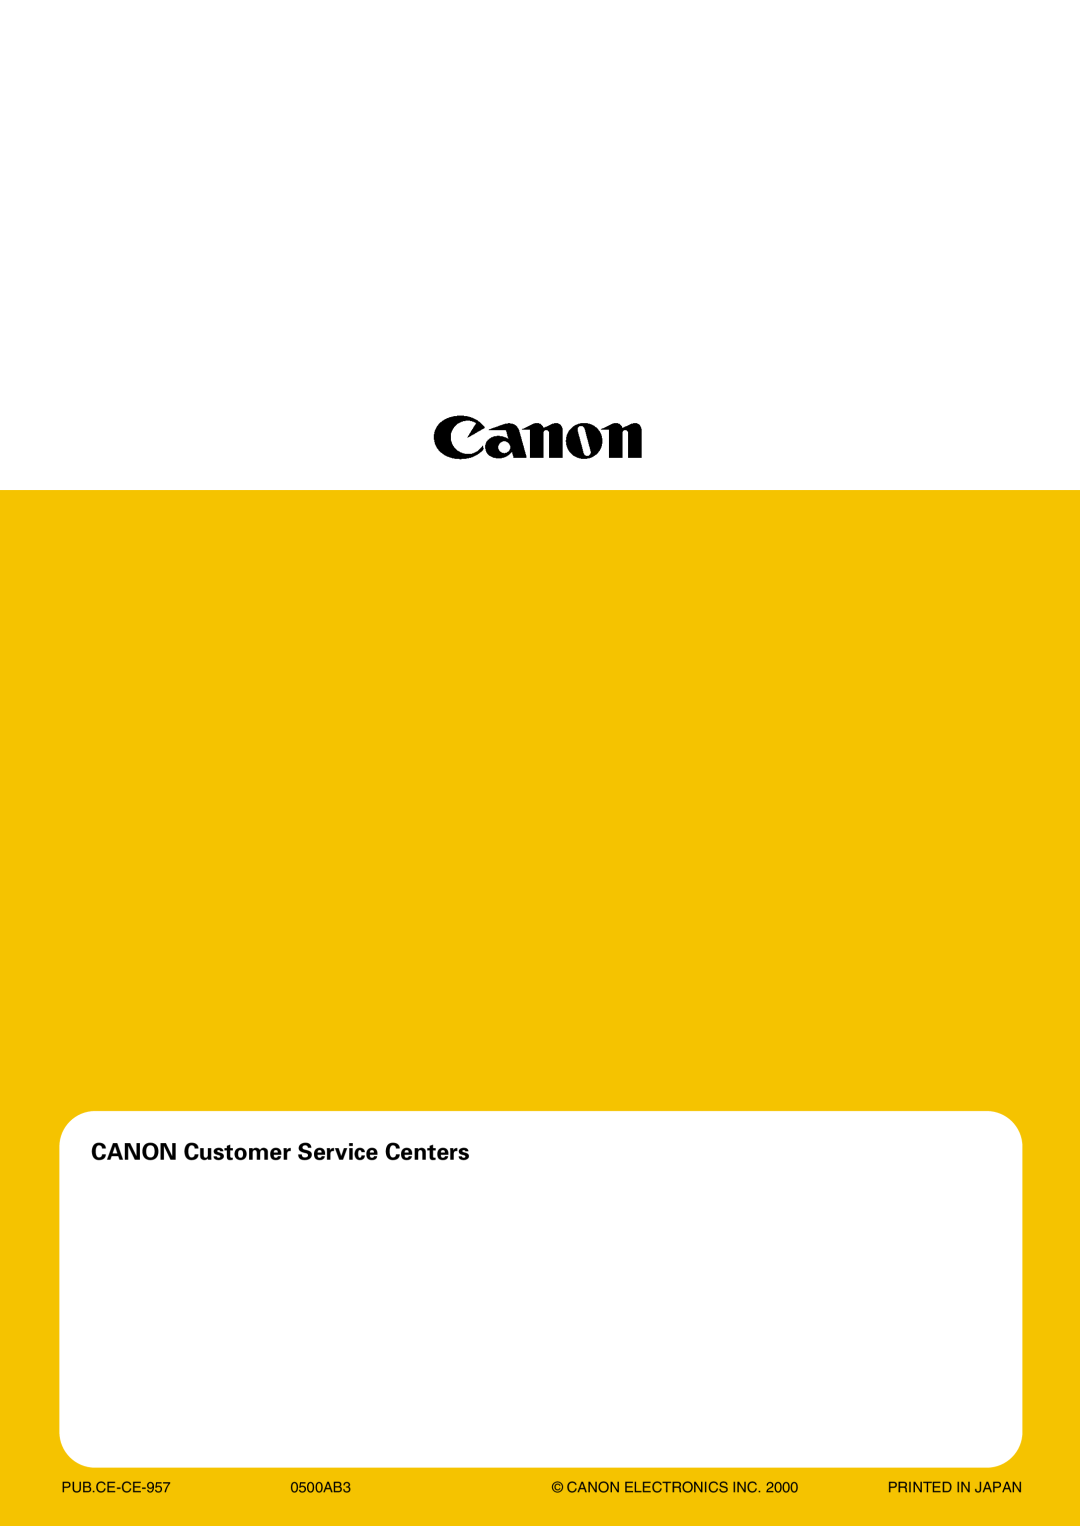 Canon DR-5080C, DR-5020 CANON Customer Service Centers, PUB.CE-CE-957, 0500AB3, Canon Electronics Inc, Printed In Japan 